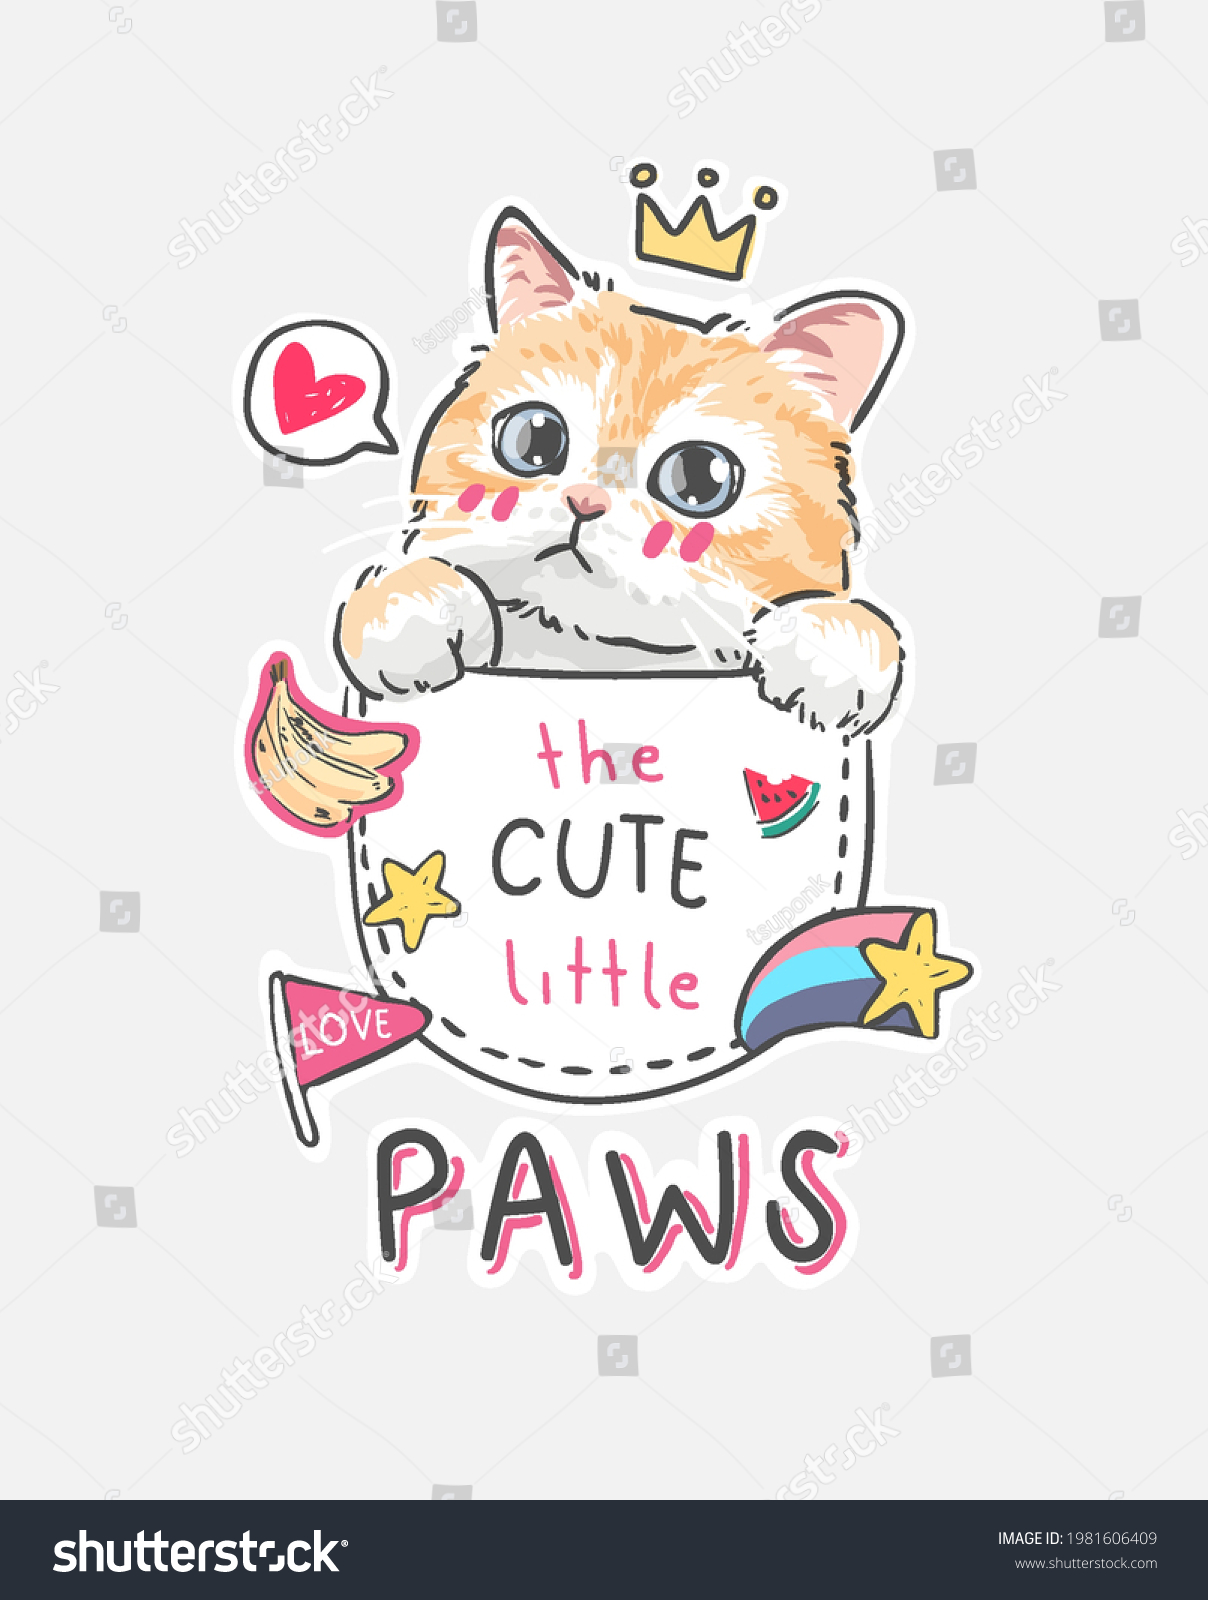 SVG of cute little paws slogan with cute cartoon kitten in shirt pocket with cute icons vector illustration svg